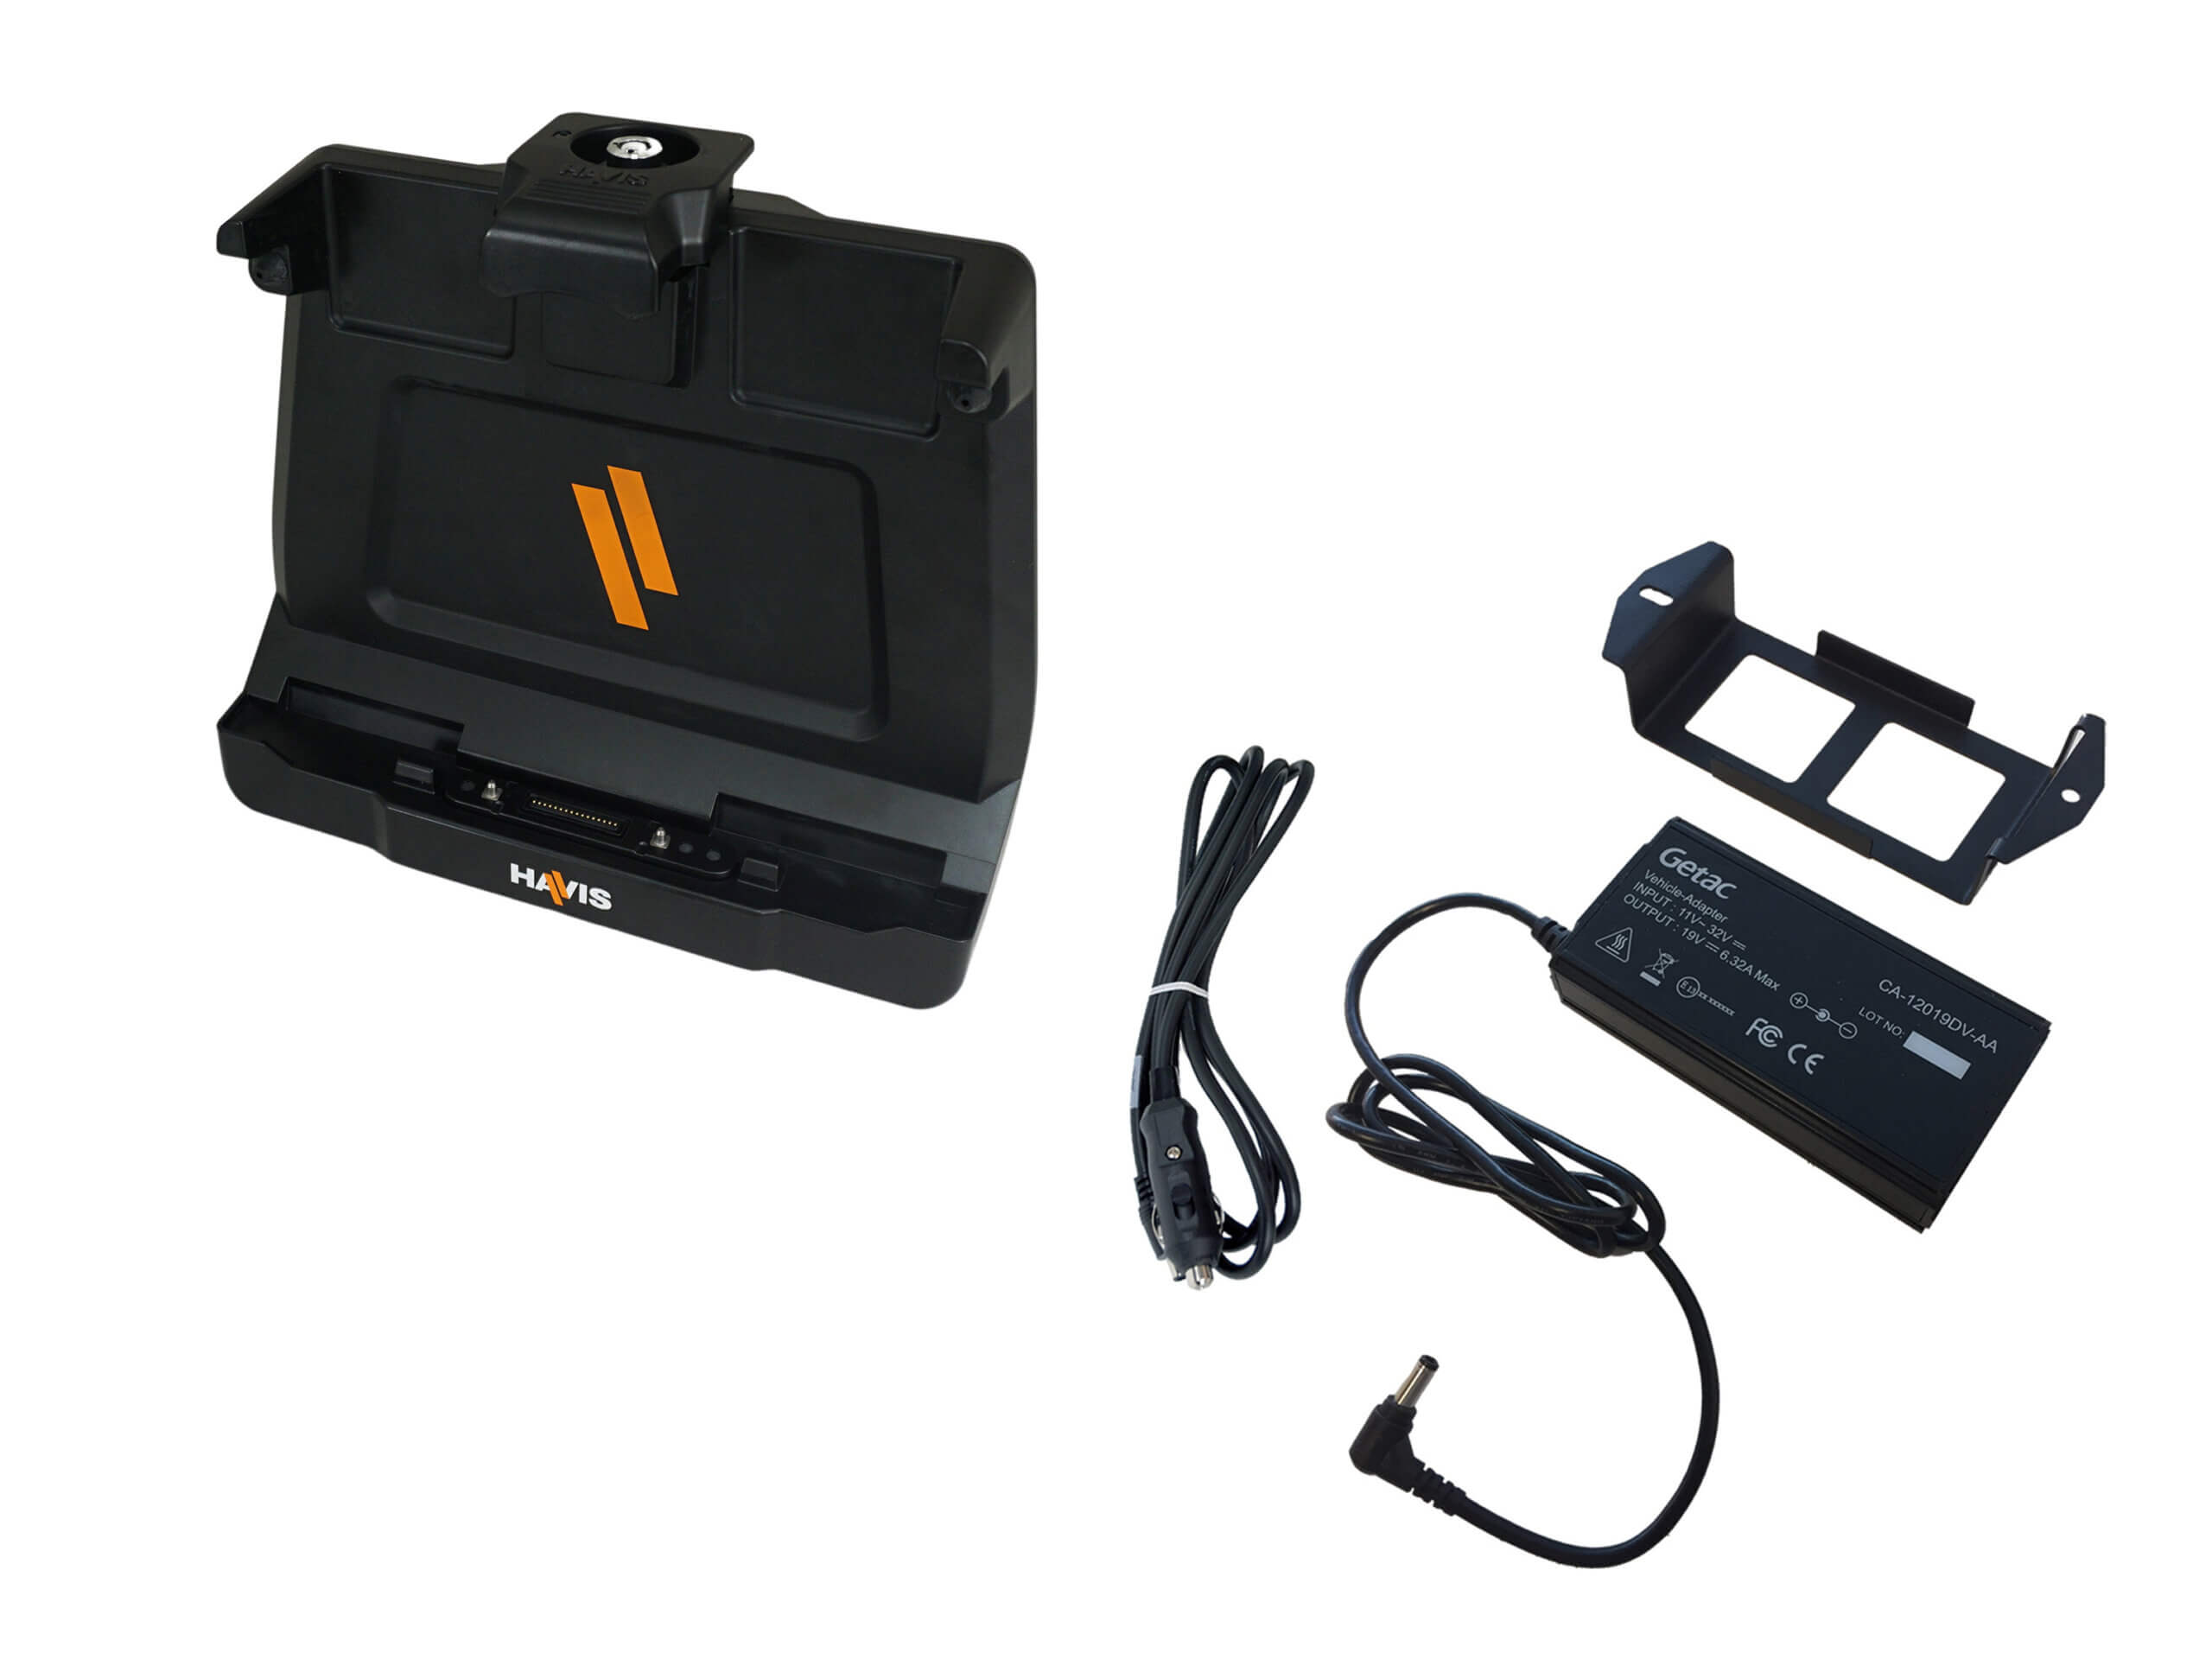 Docking Station For Getac ZX10 Tablet With External Power Supply